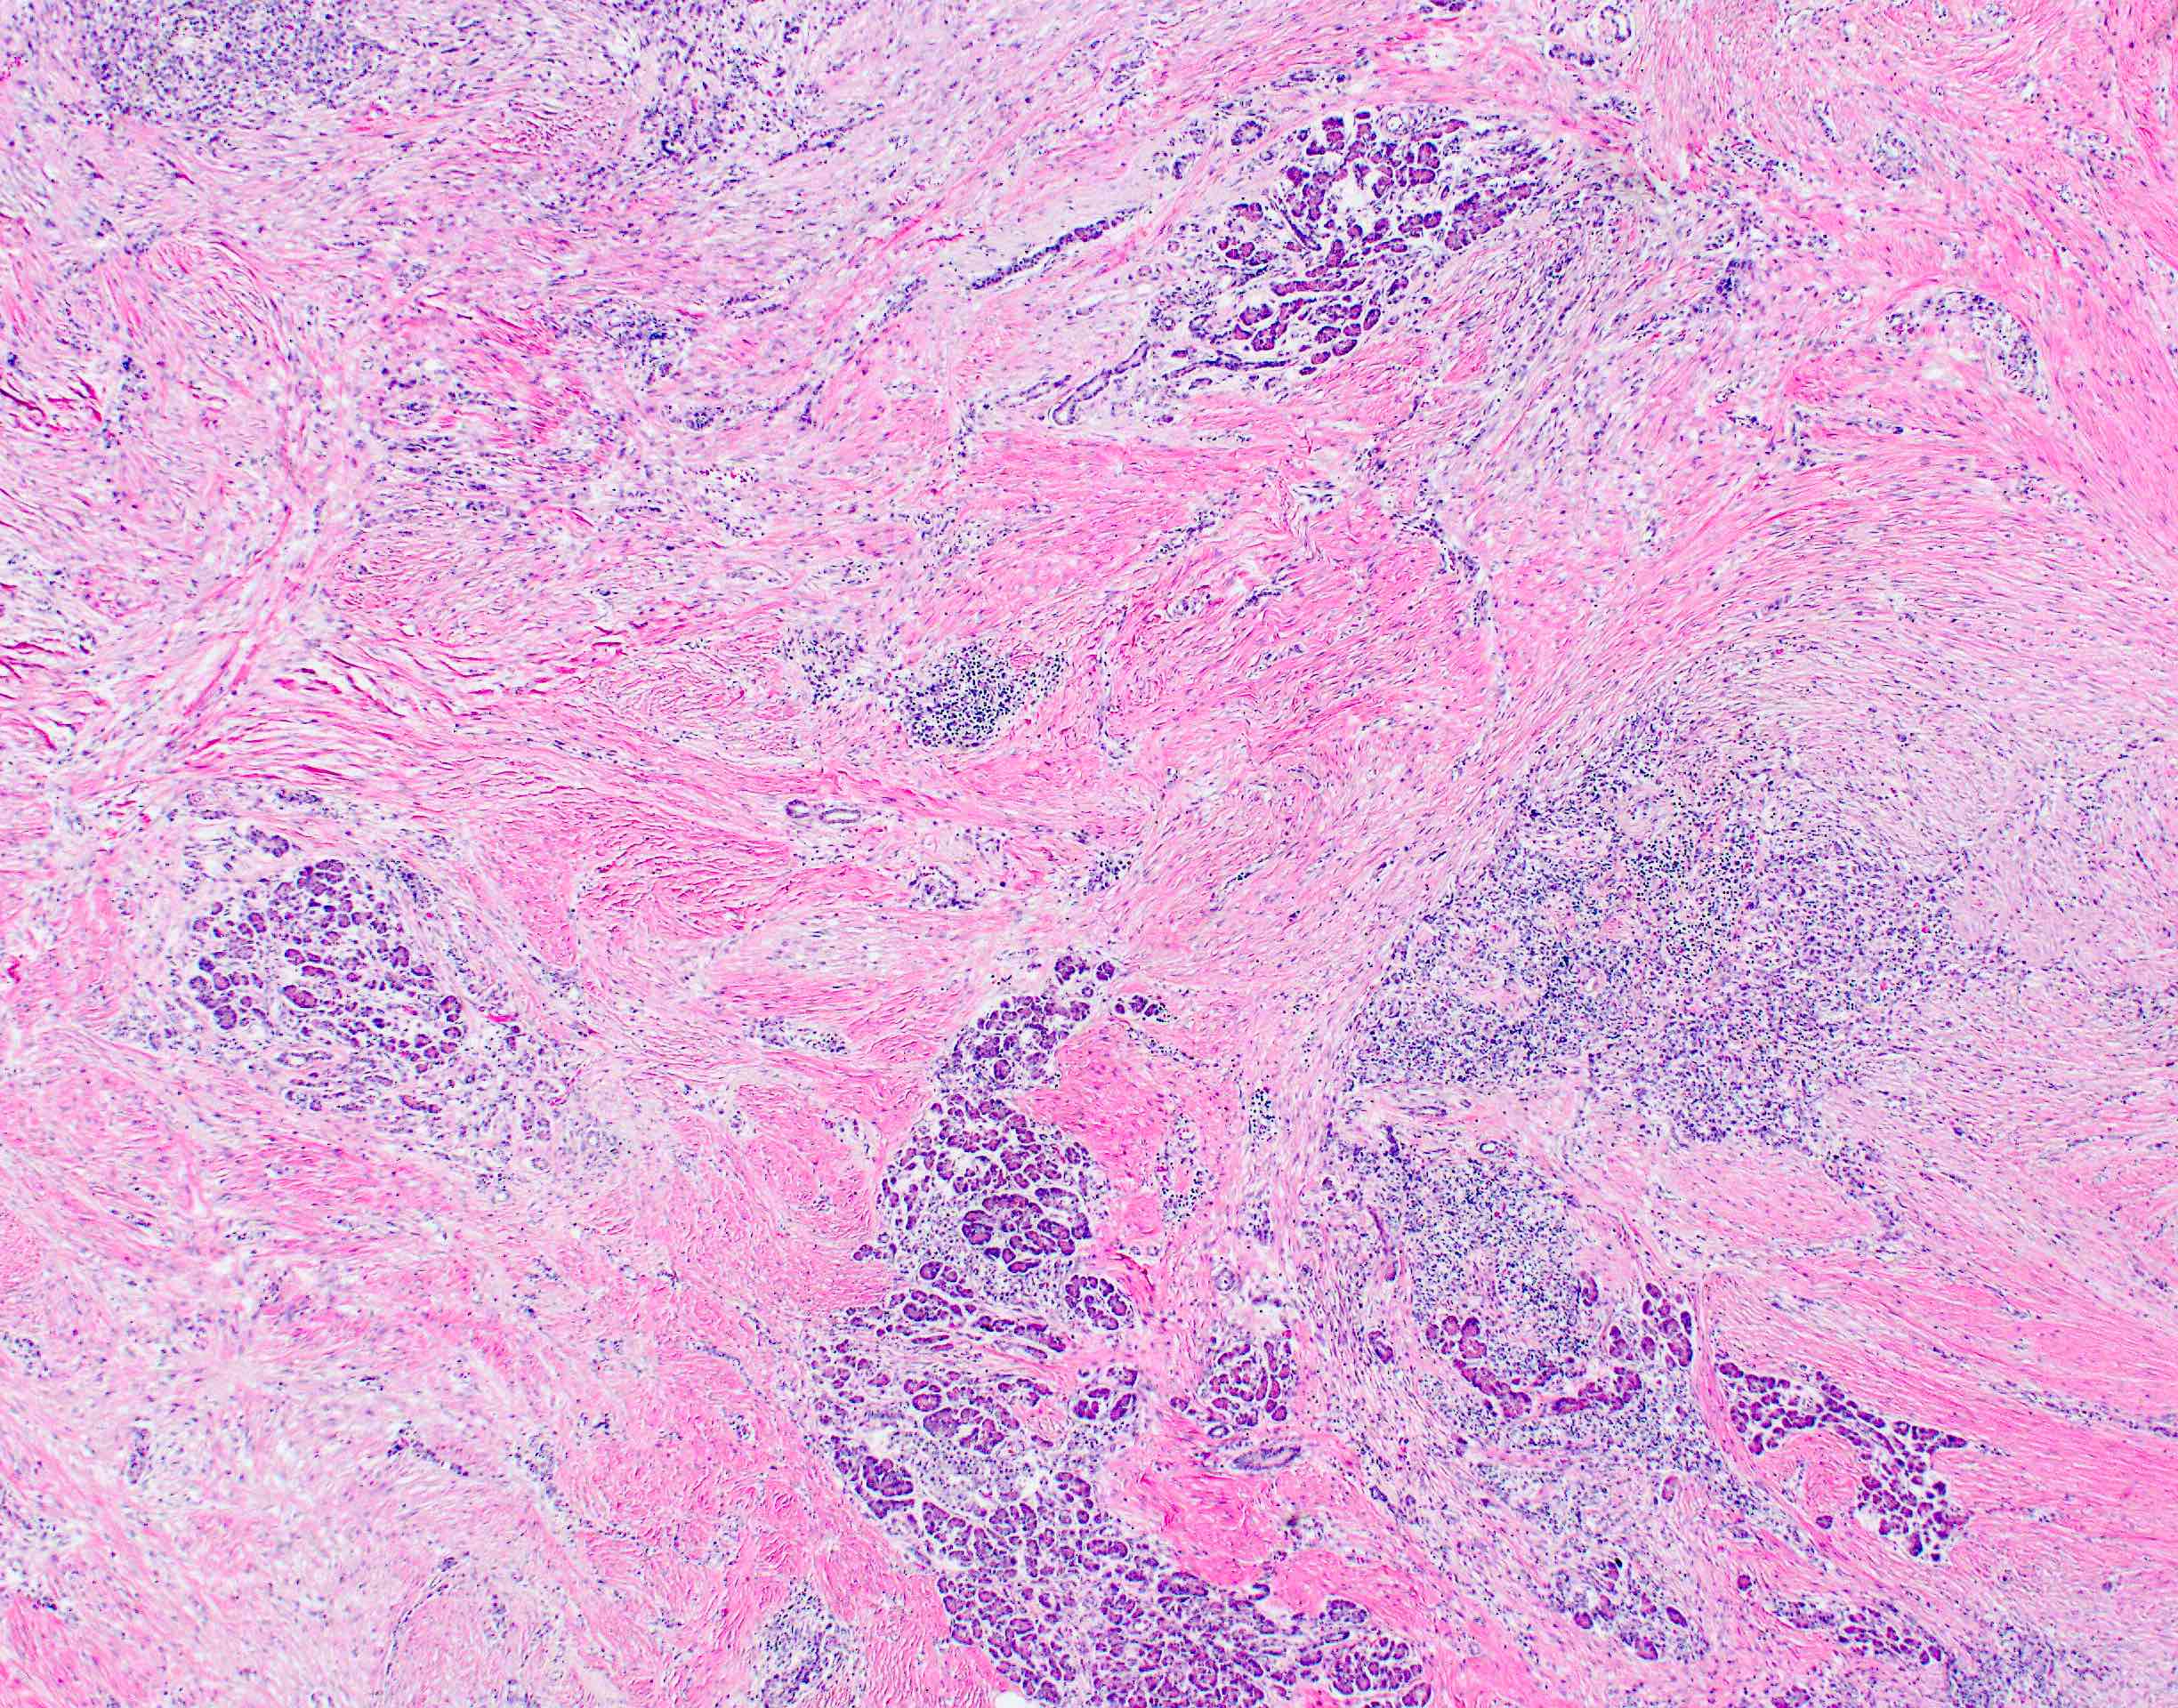 Entrapped pancreatic parenchyma